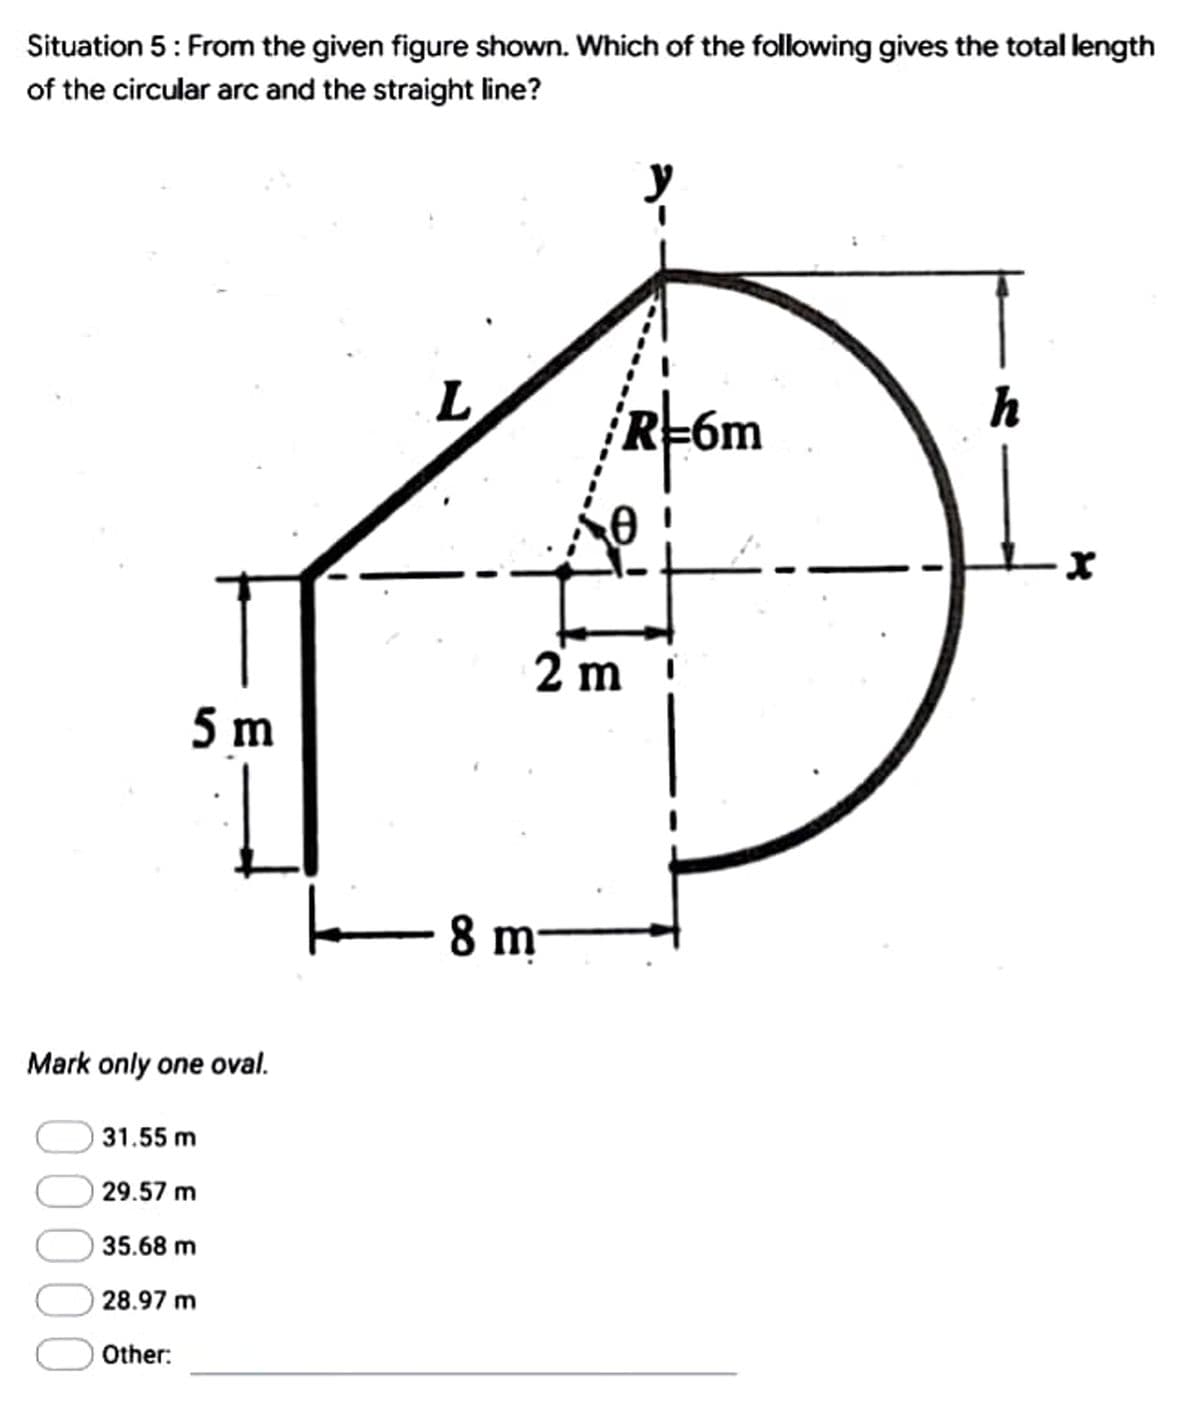 Situation 5: From the given figure shown. Which of the following gives the total length
of the circular arc and the straight line?
L
h
R=6m
5 m
Mark only one oval.
31.55 m
29.57 m
35.68 m
28.97 m
Other:
0
2 m
8 m
X